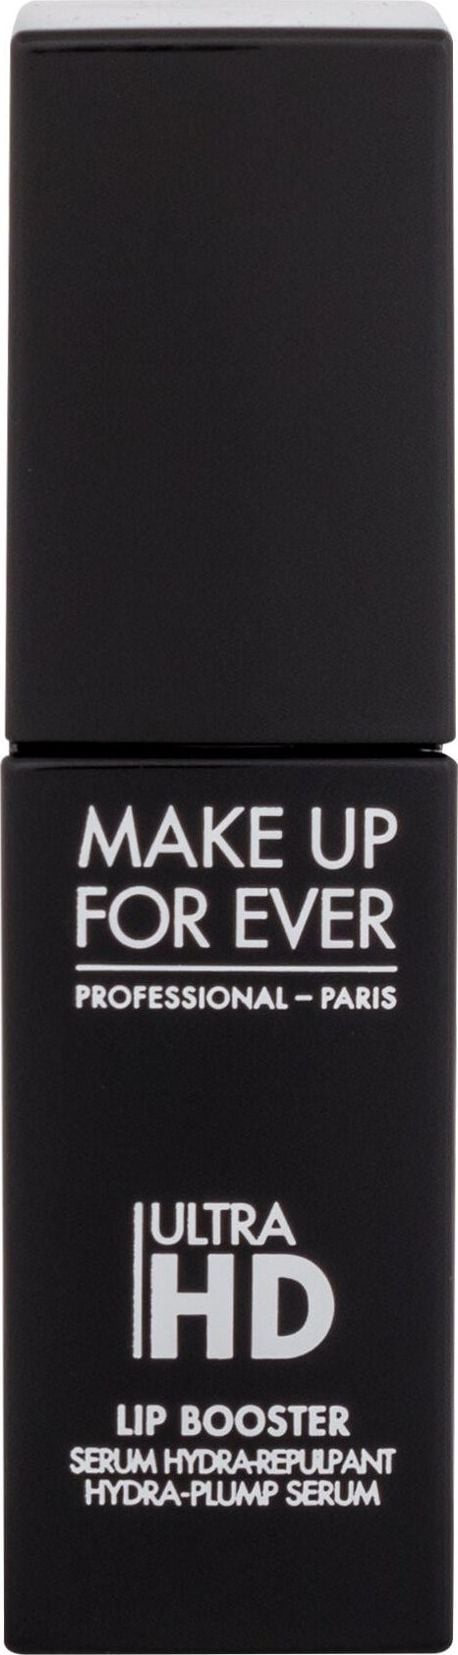 Make up for Ever Make Up For Ever Ultra HD Lip Booster Balsam de buze 6ml 00 Universelle